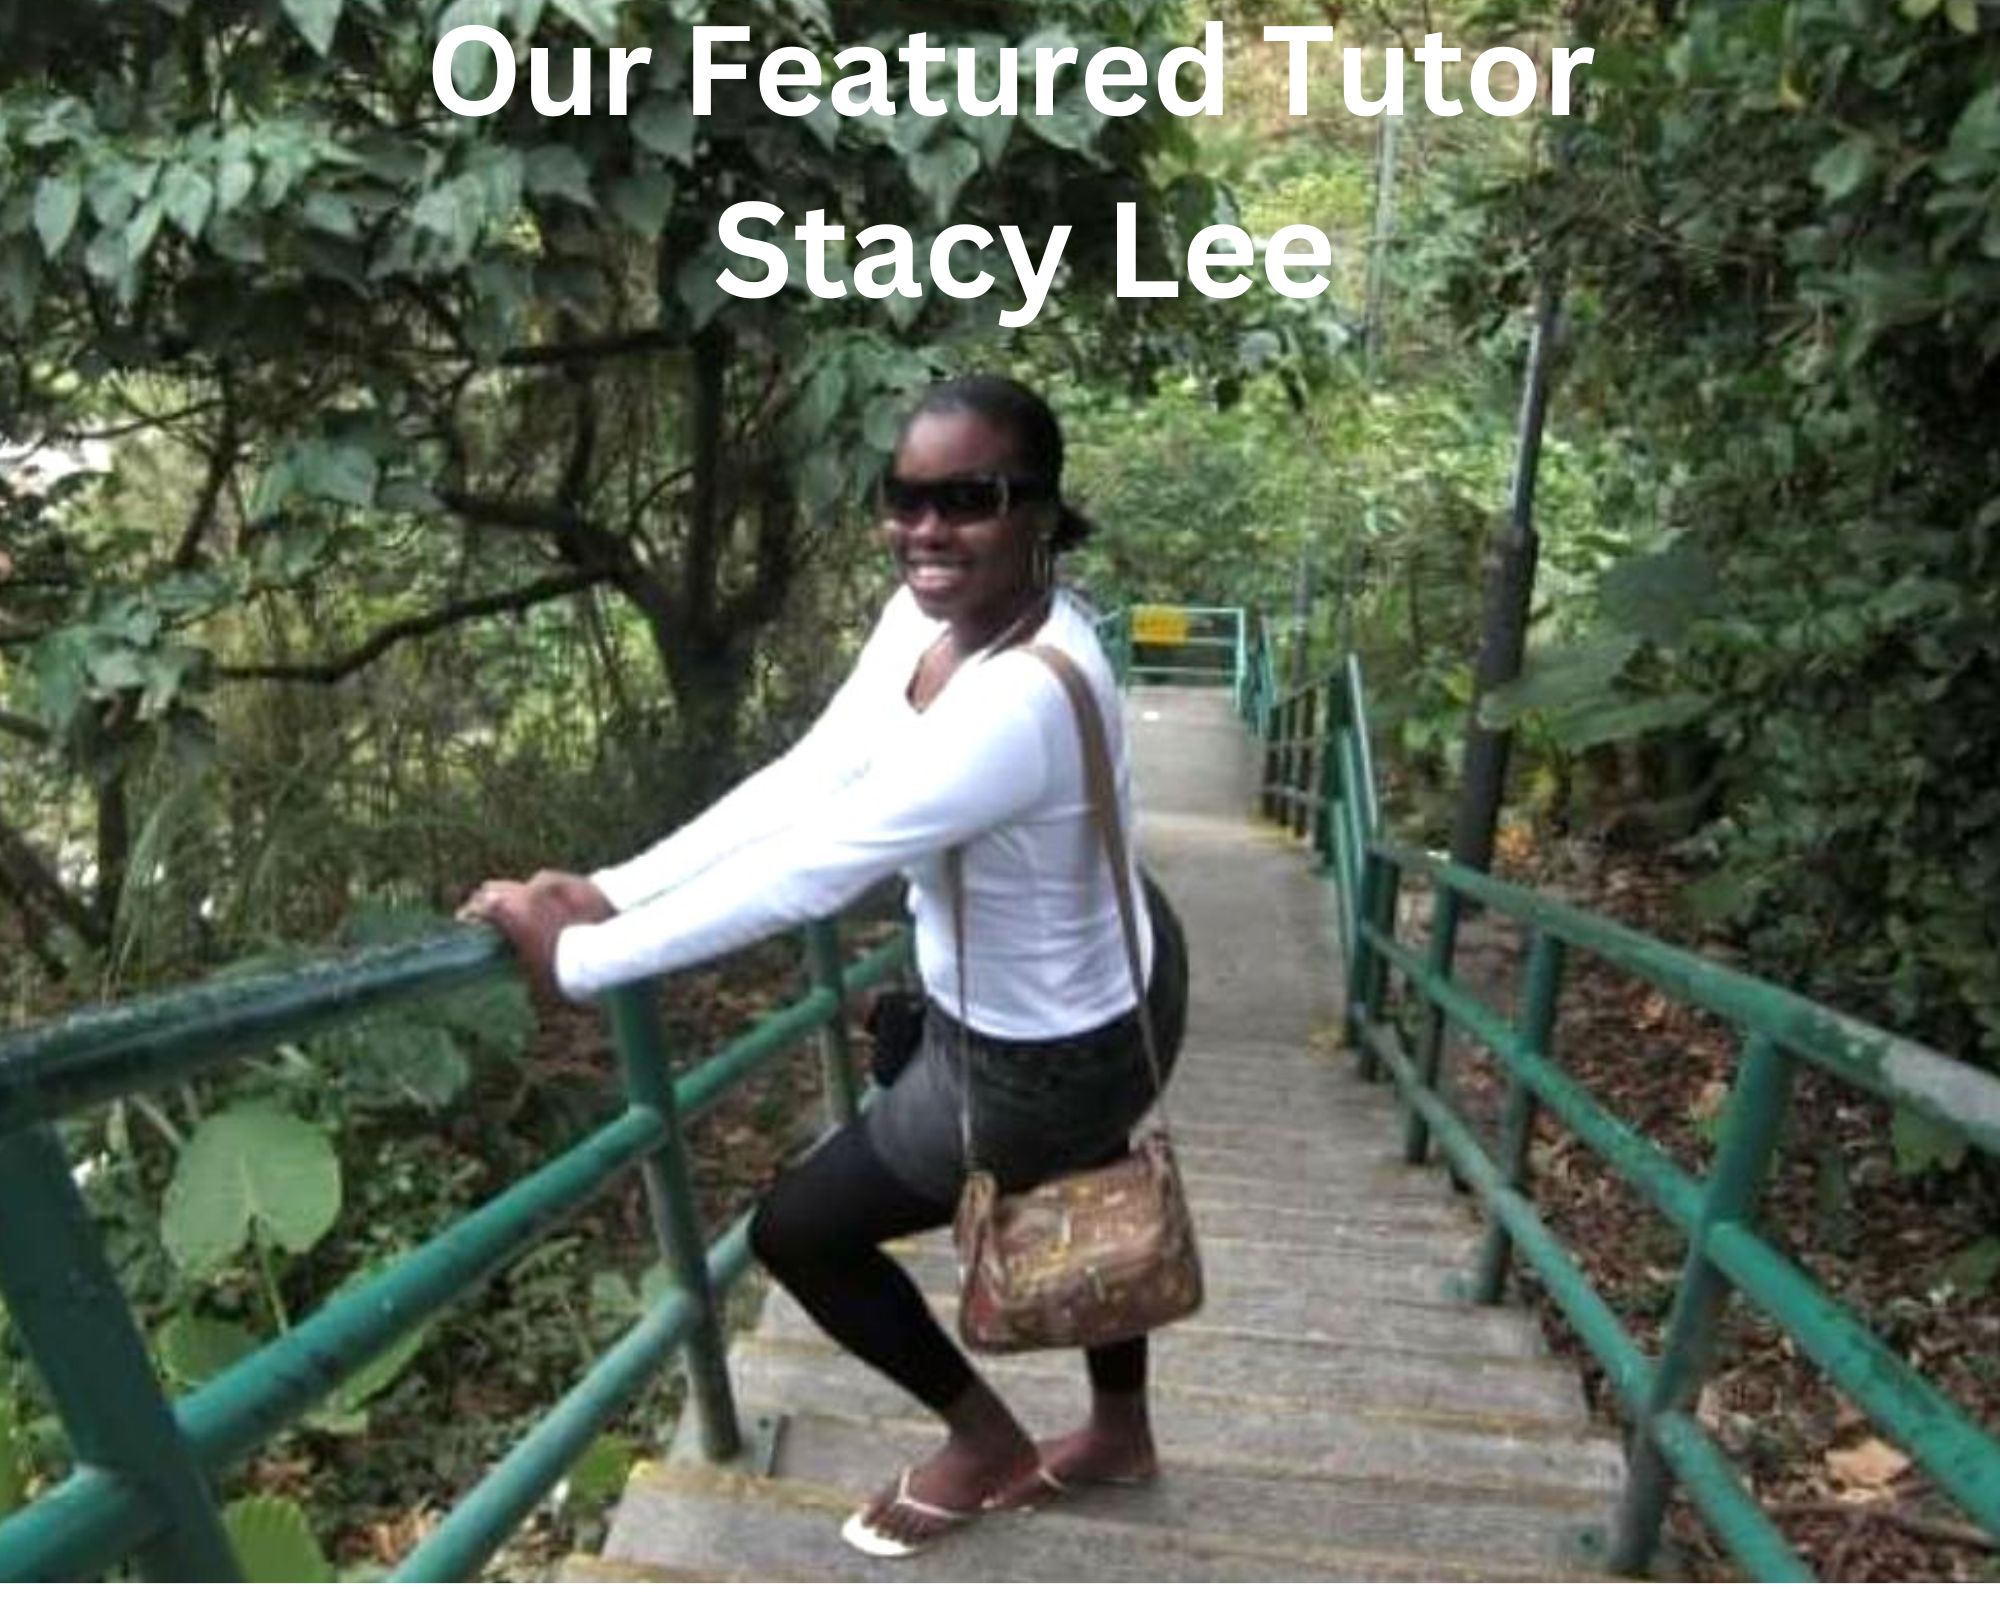 Teaching has helped me fulfill a desire that I have to help others | Lonet.Academy's stories